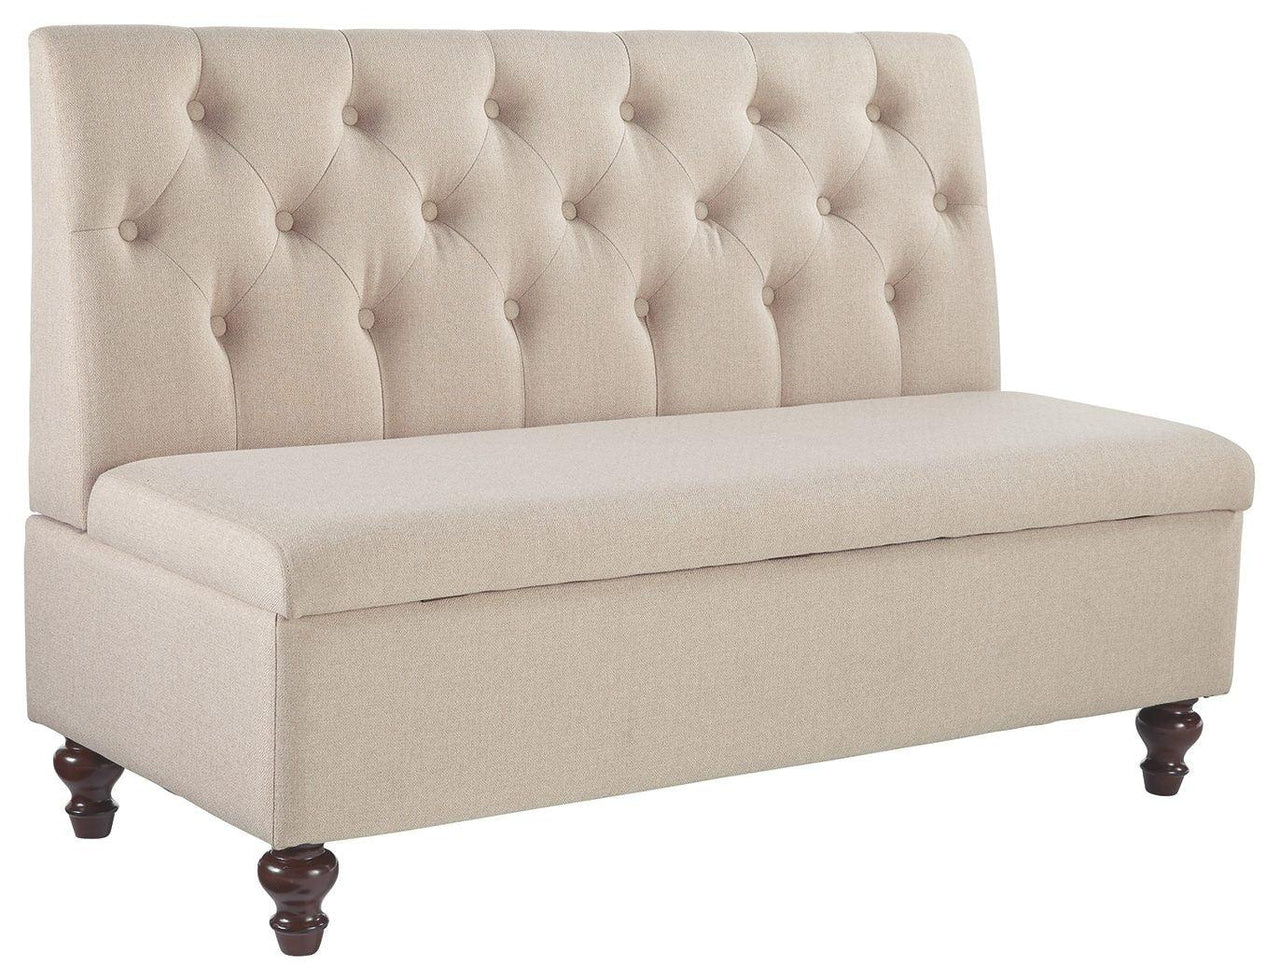 Gwendale - Light Beige - Storage Bench Tony's Home Furnishings Furniture. Beds. Dressers. Sofas.